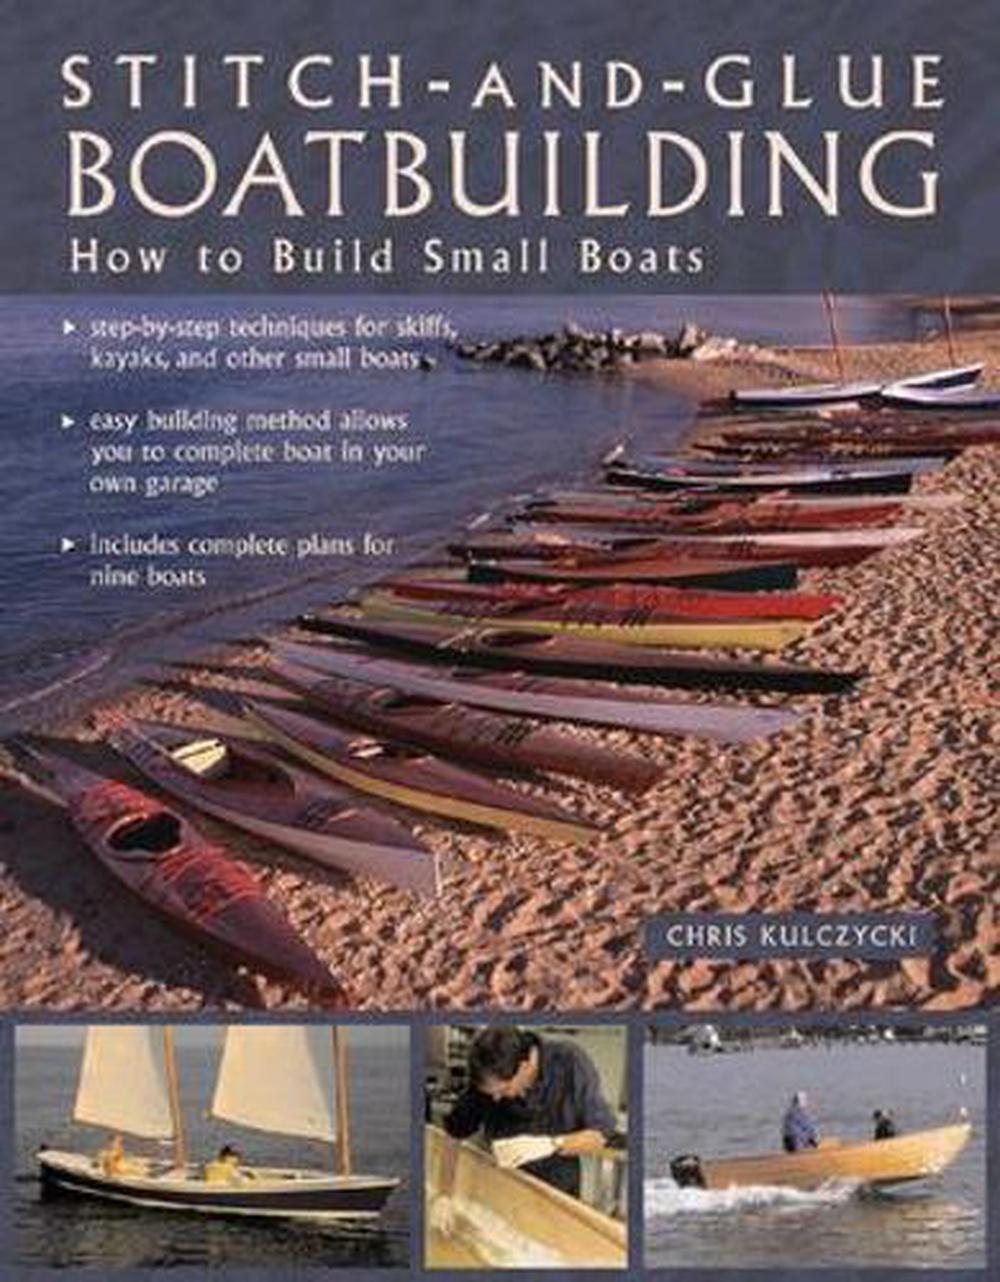 Stitch-And-Glue Boatbuilding: How to Build Kayaks and 